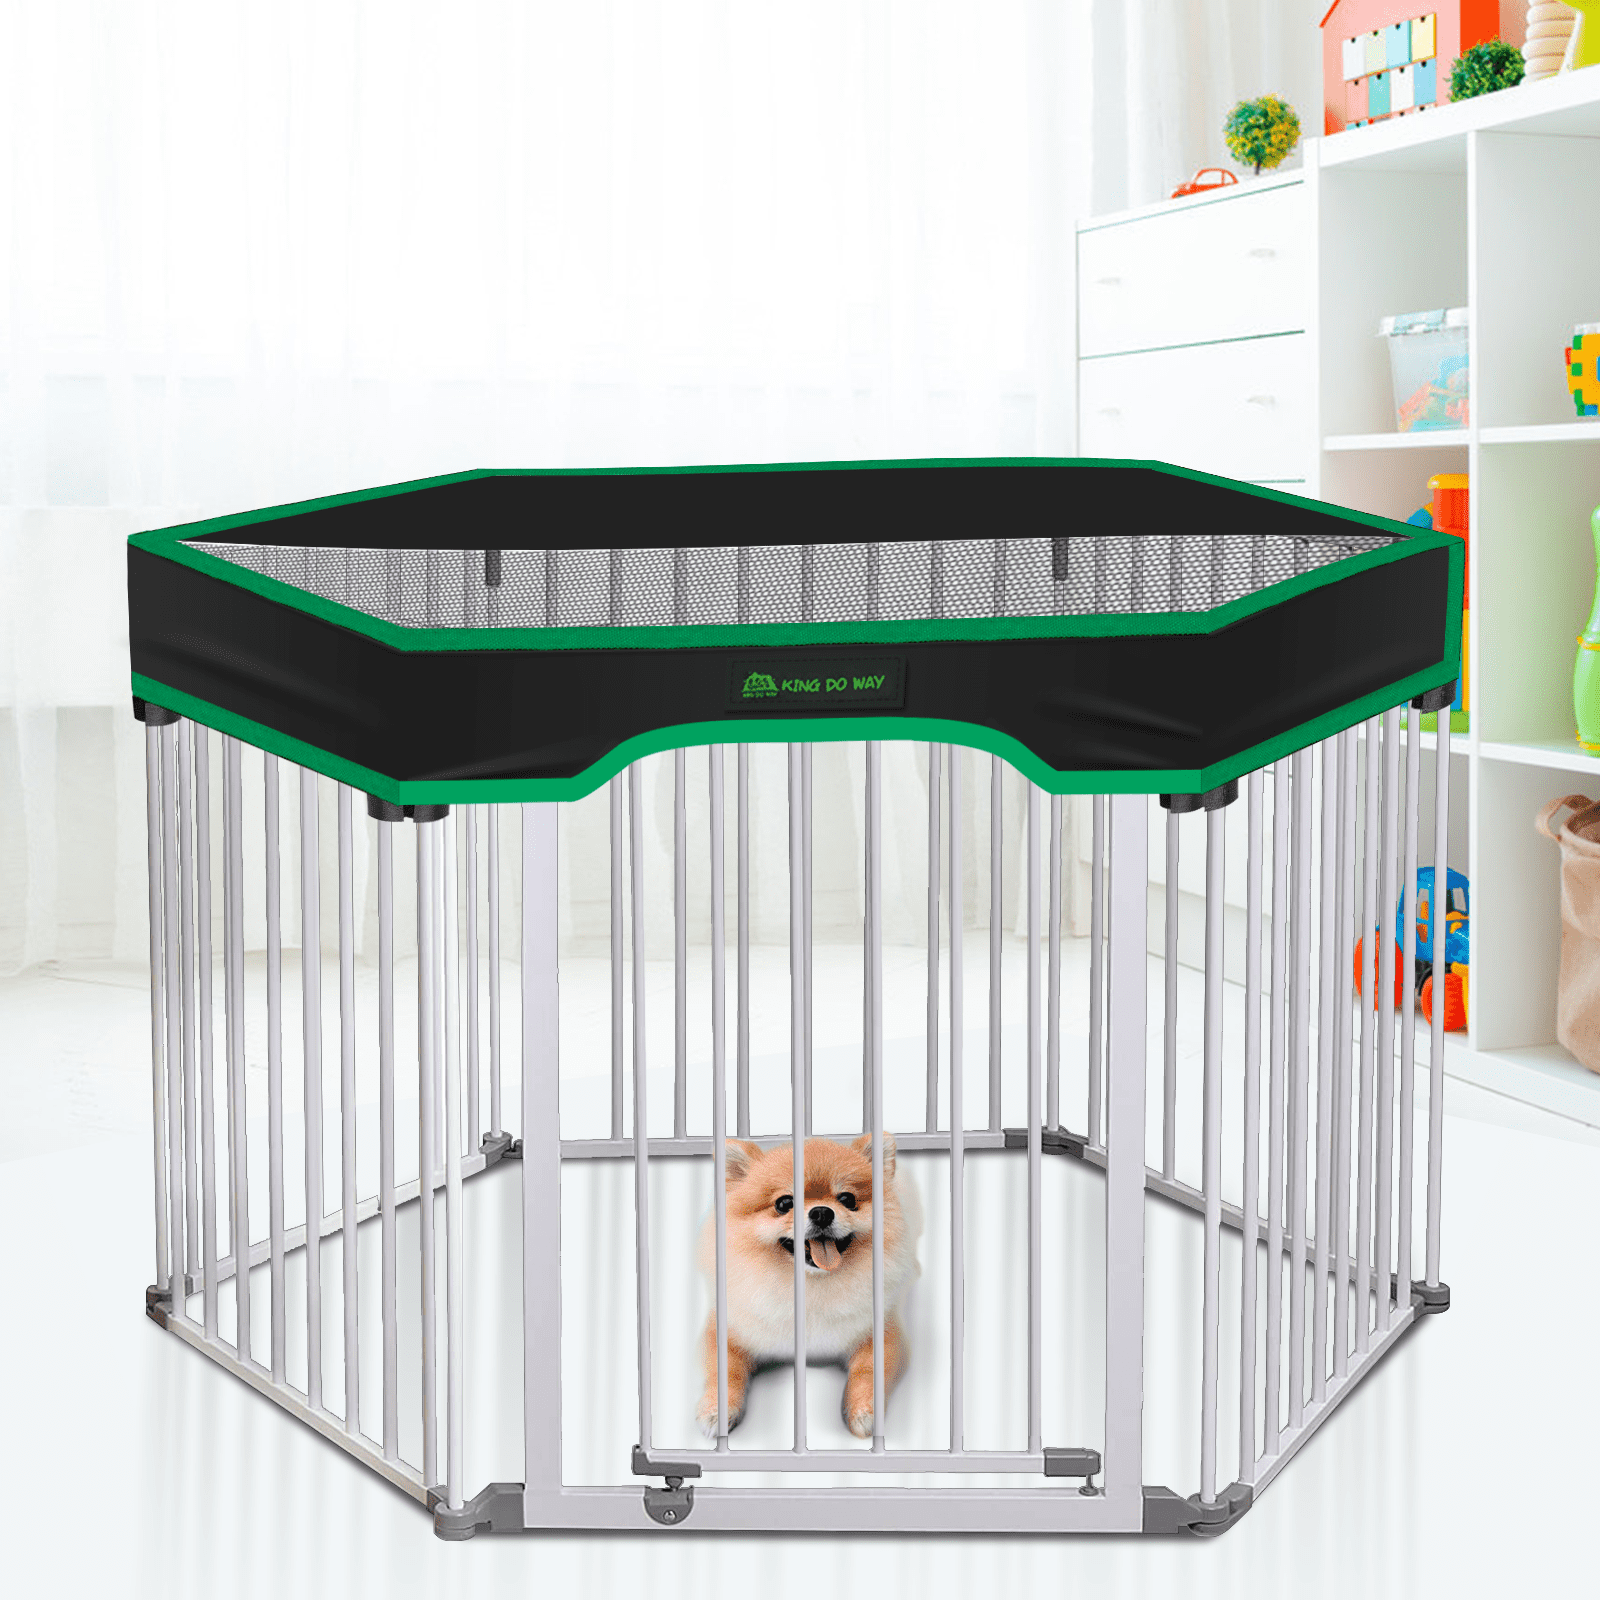 HENNAED Dog Playpen Cover Pet Play Pen Cover Prevents Escape Pet Pen Cover Indoor/Outdoor Fits 24 Inch Wide 8 Panel Playpen PLAYPEN NOT Included 